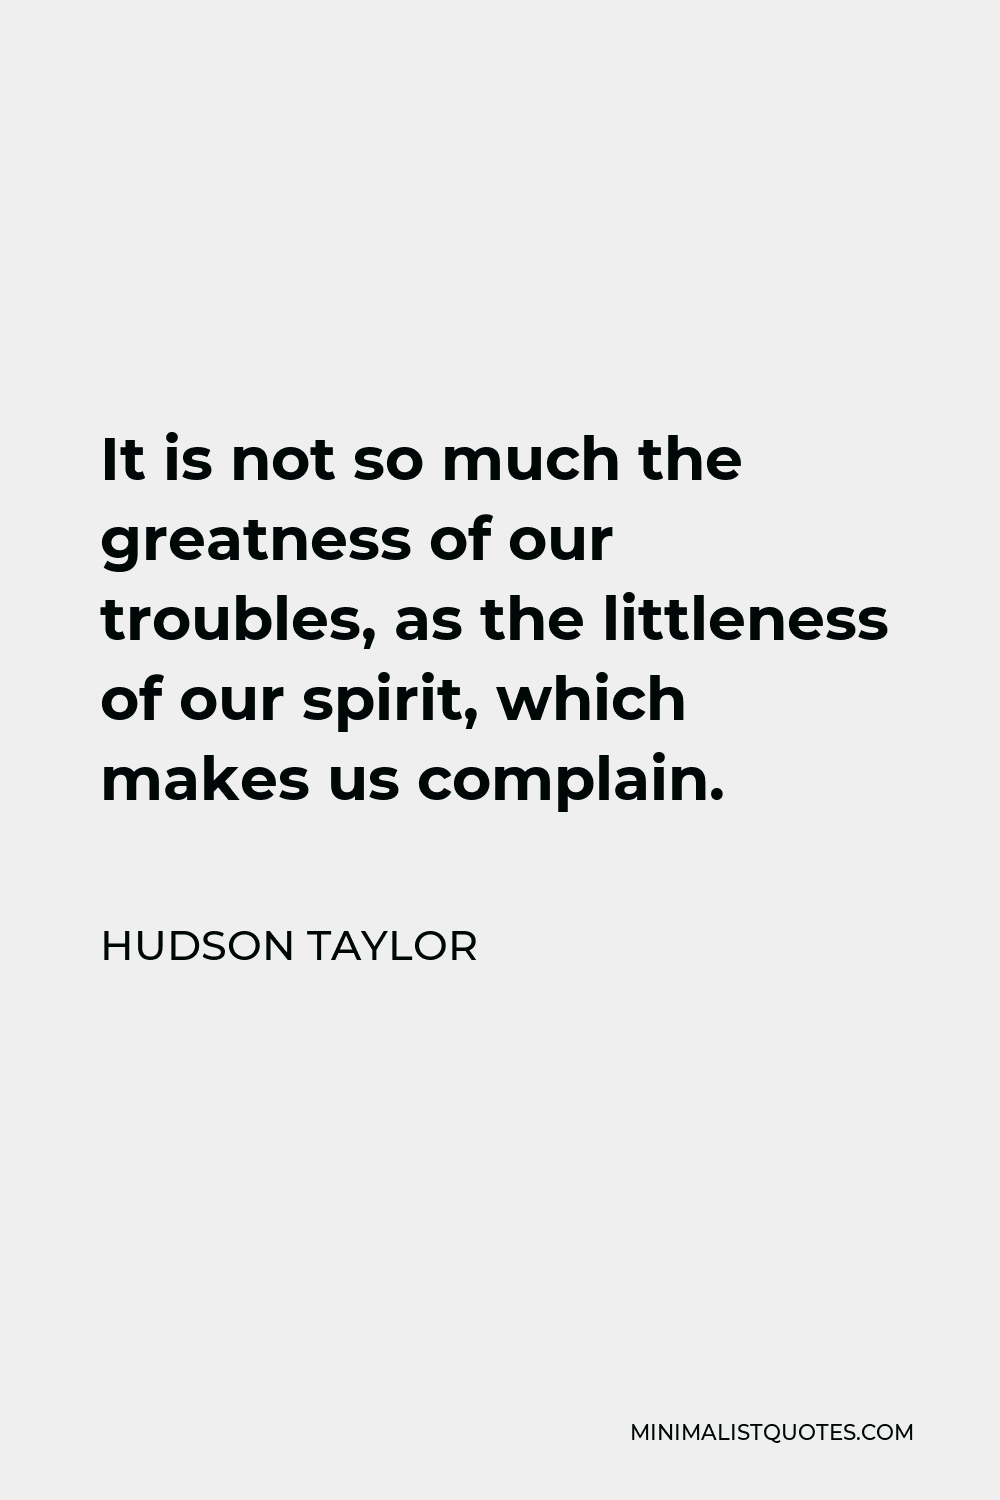 Hudson Taylor Quote - It is not so much the greatness of our troubles, as the littleness of our spirit, which makes us complain.